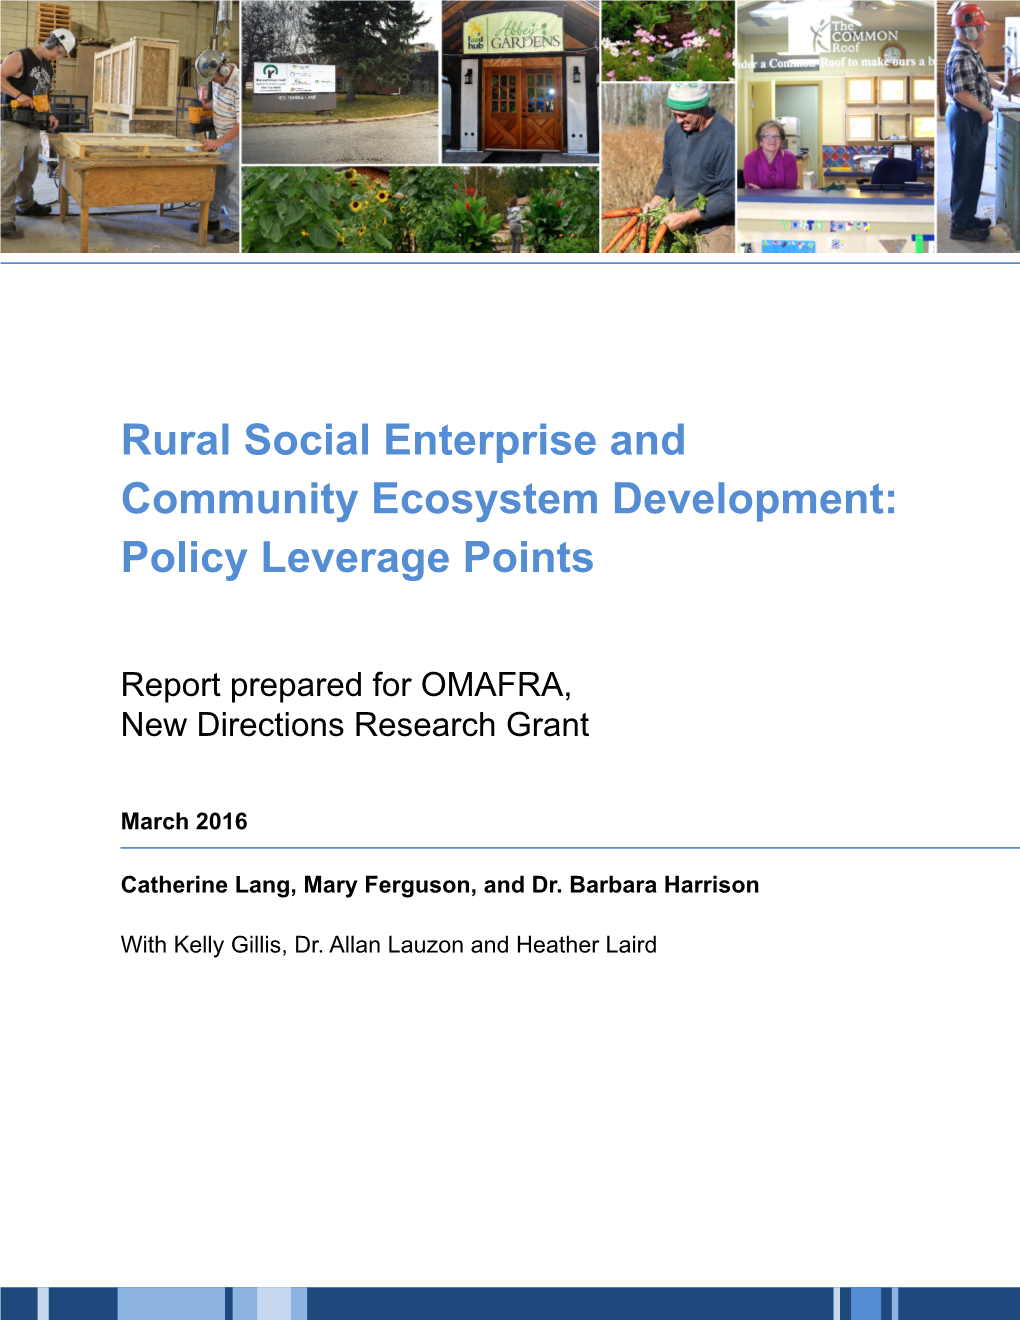 Rural Social Enterprise and Community Ecosystem Development: Policy Leverage Points